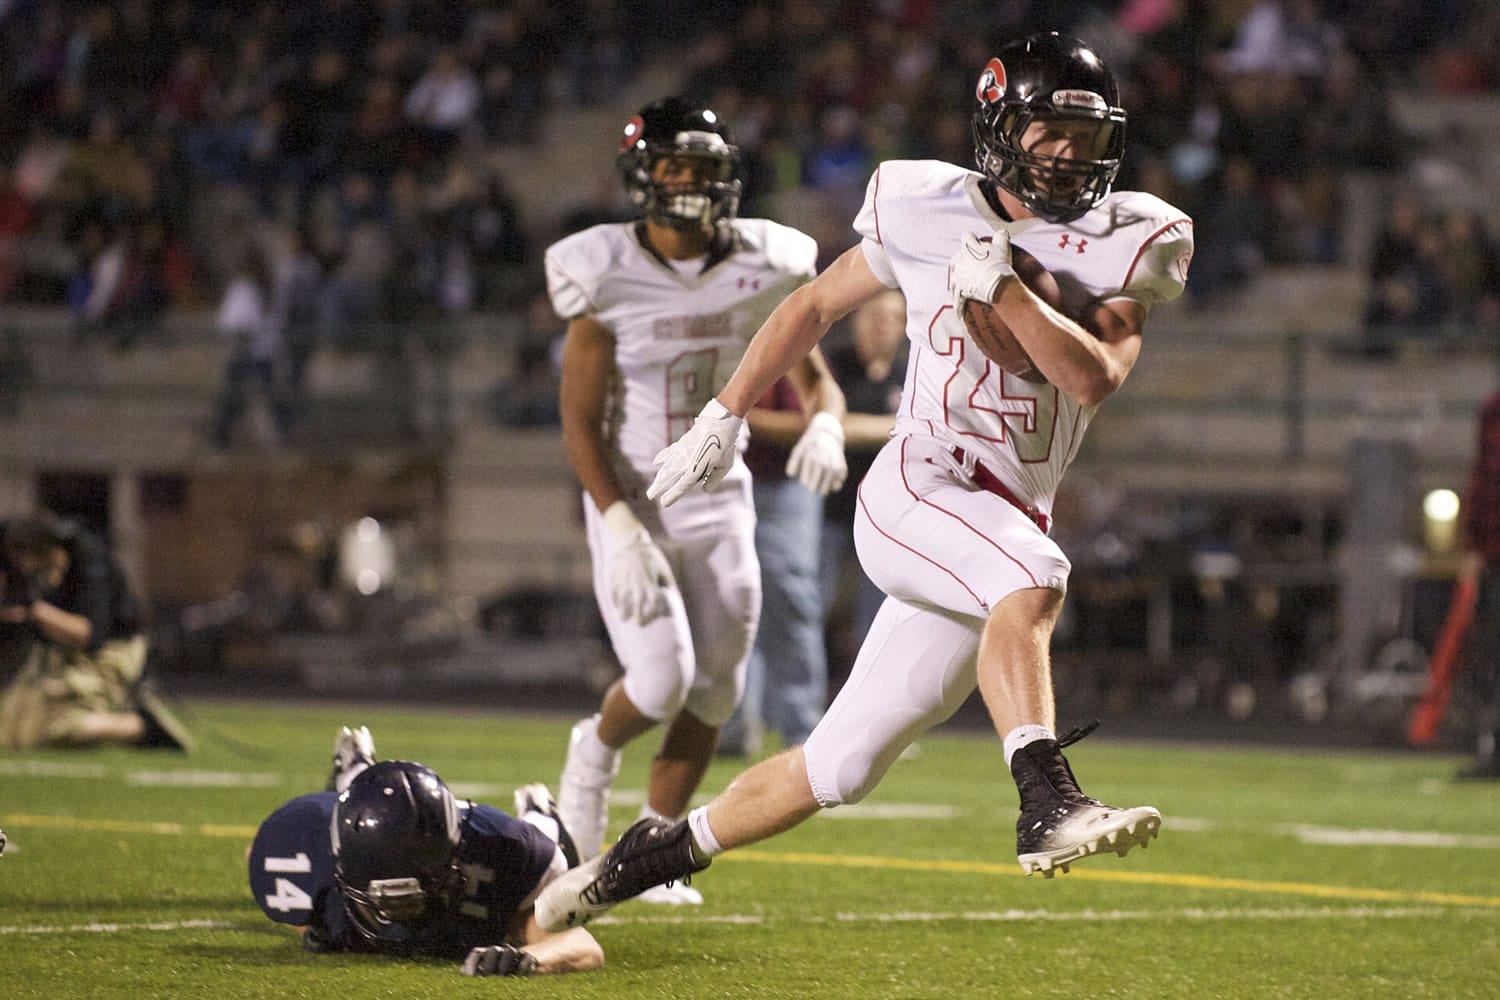 Camas running back Cole Zarcone carries the ball for a touchdown against Skyview.